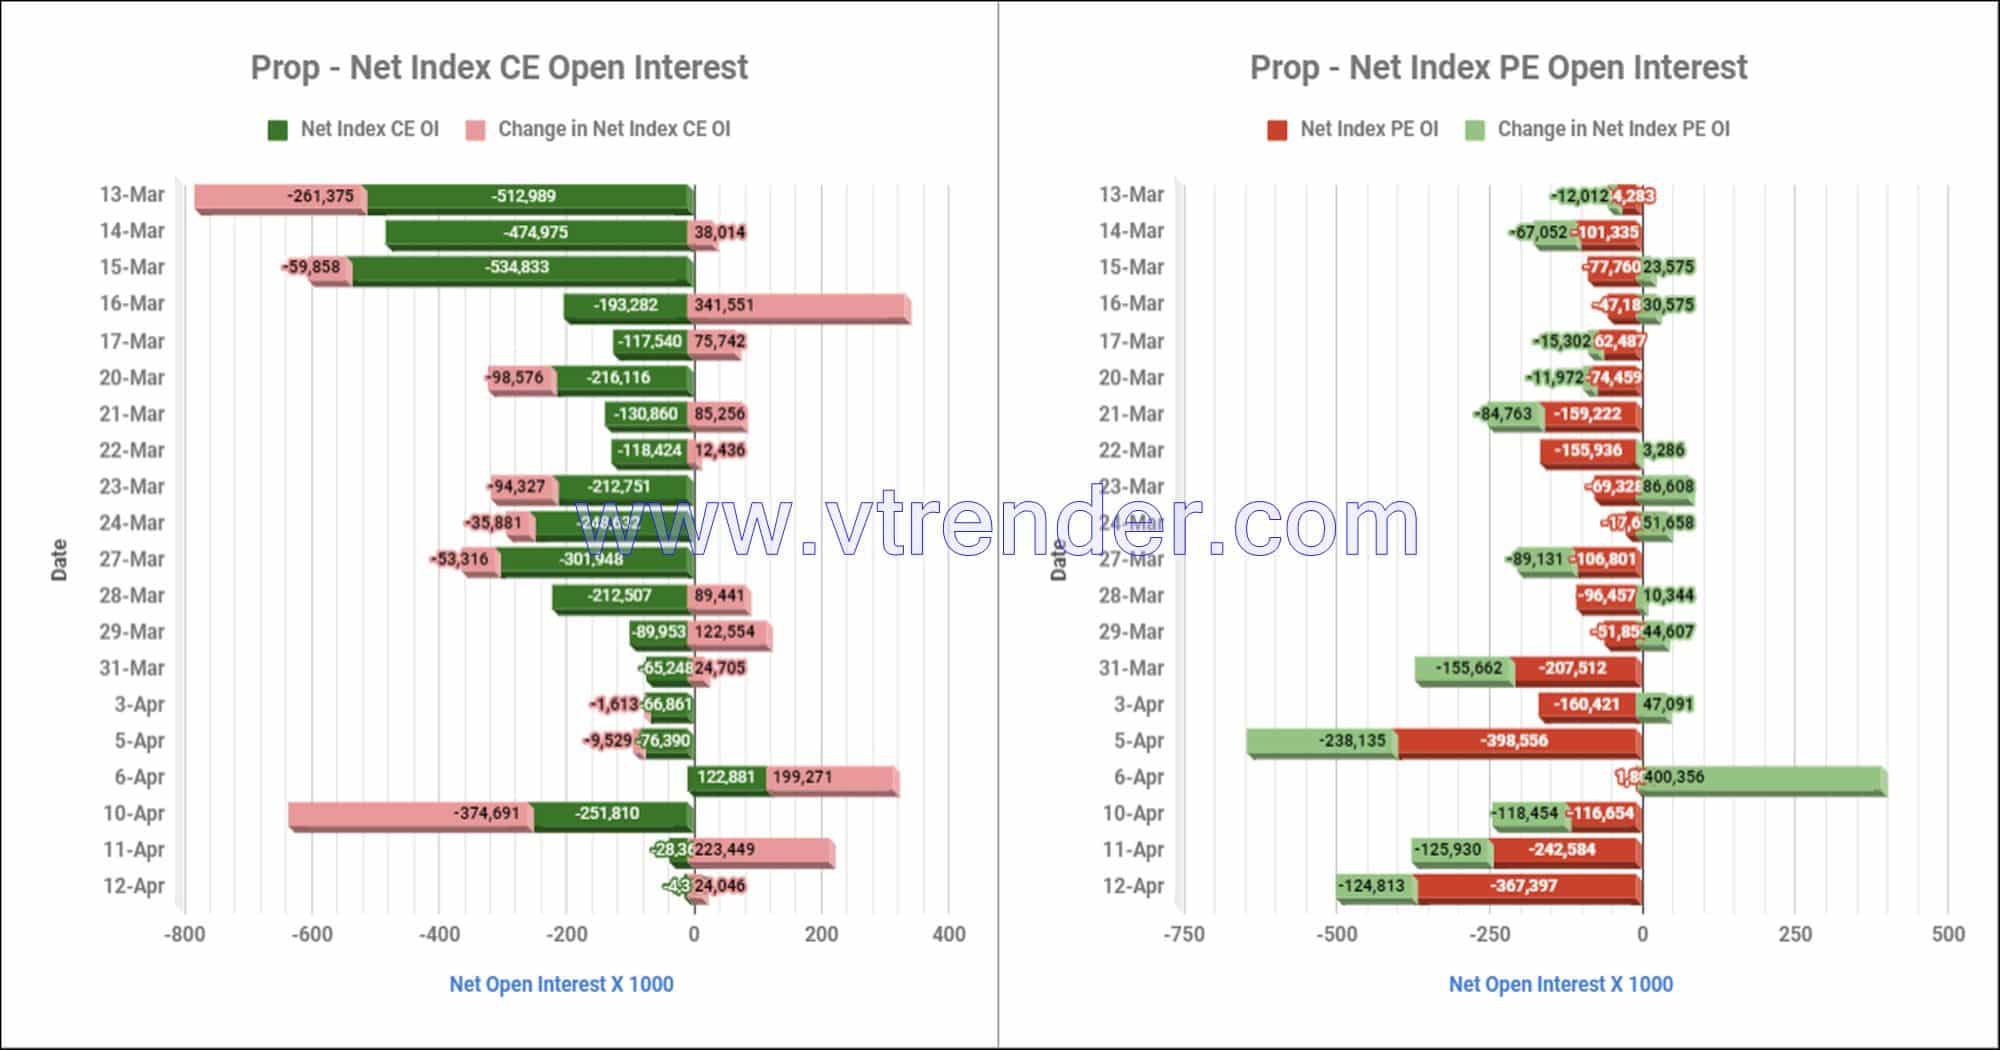 Proinop12Apr Participantwise Net Open Interest And Net Equity Investments – 12Th Apr 2023 Client, Equity, Fii, Index Futures, Index Options, Open Interest, Prop